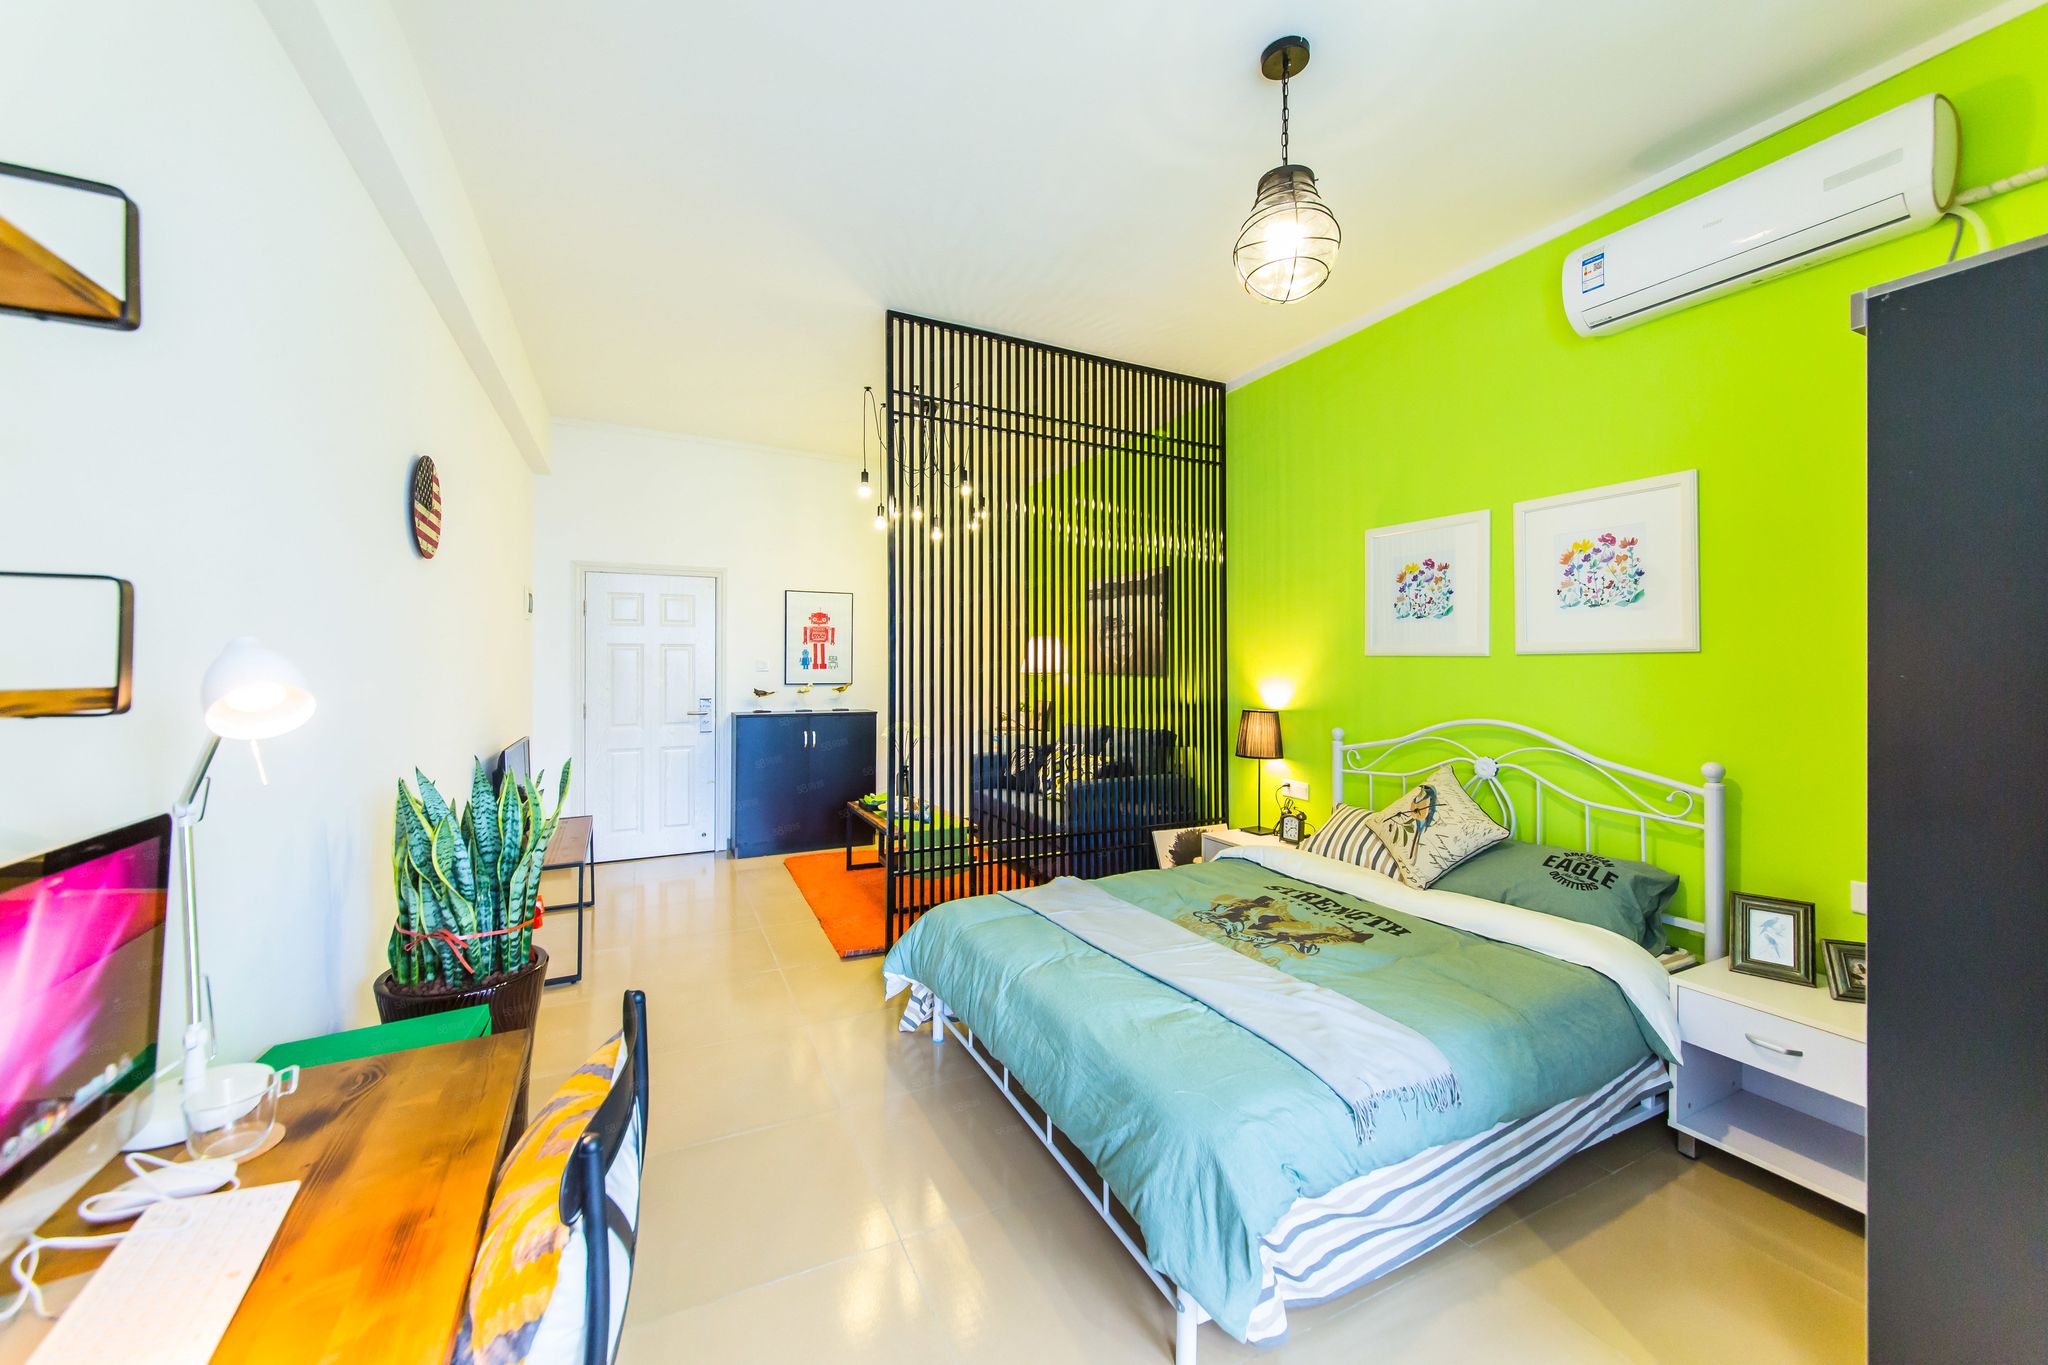 Featured image for “Nice apartment in Baoan”